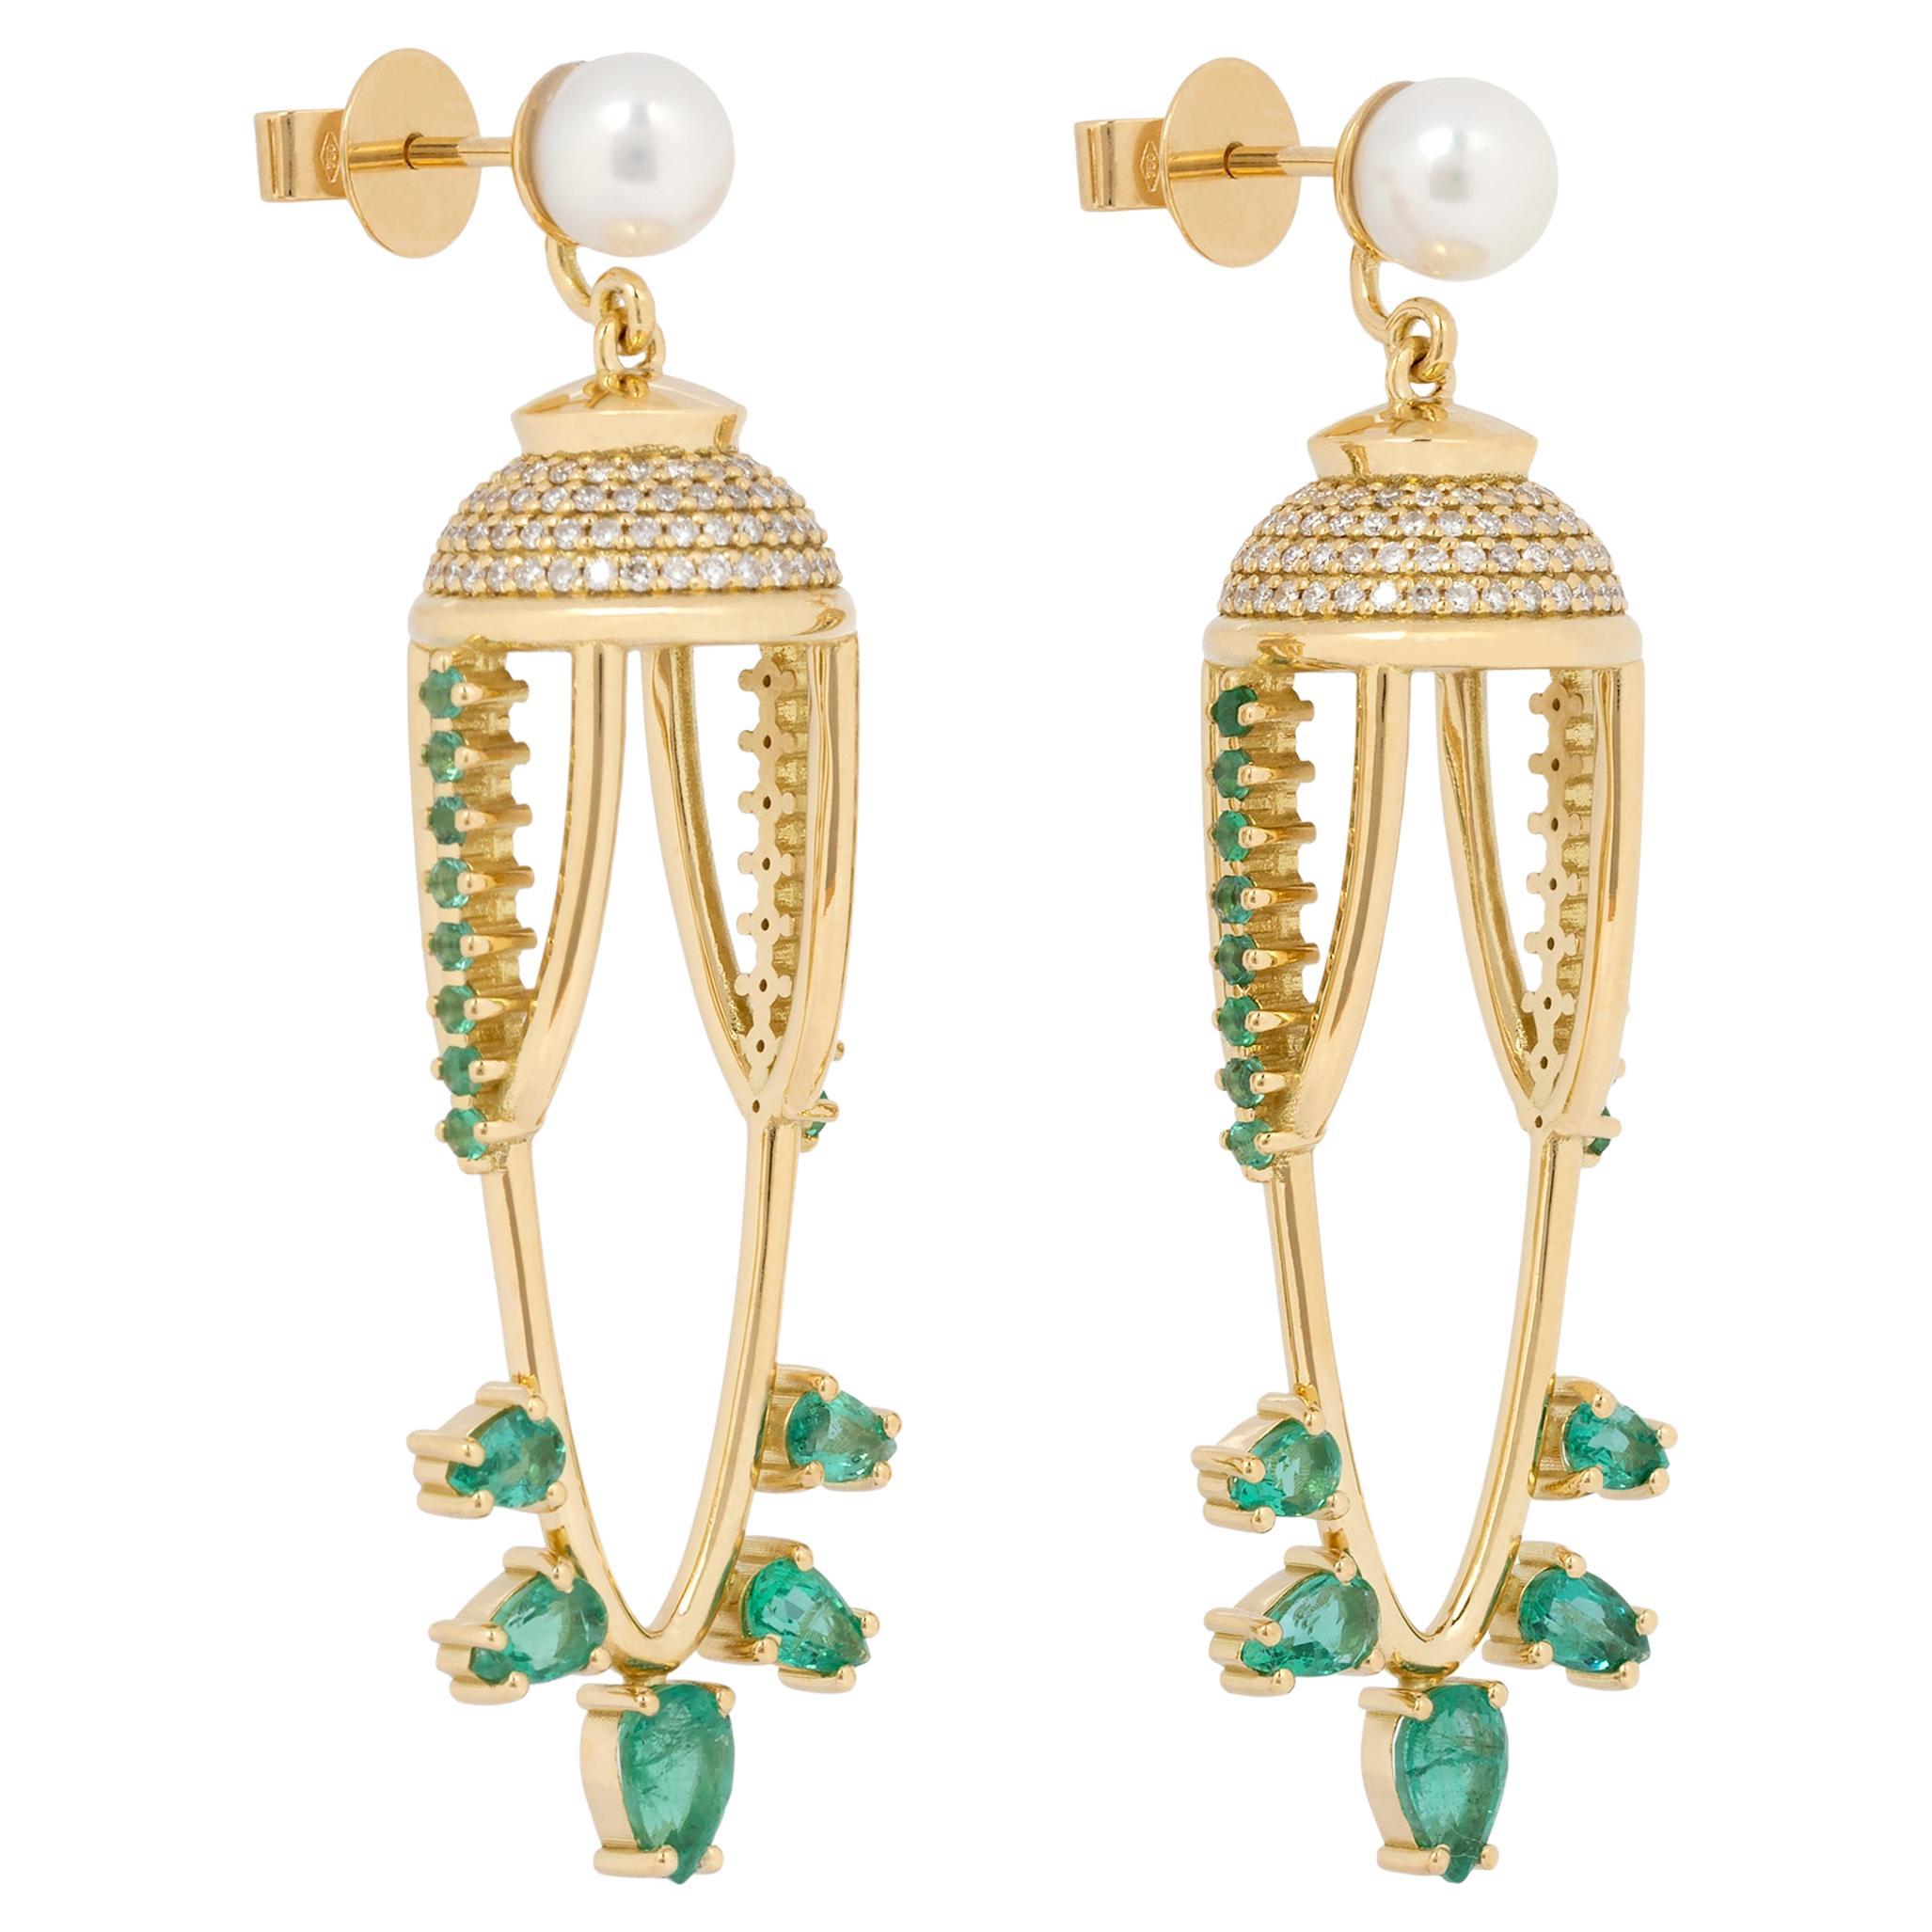 Abundance Earrings in 18 Karat Gold with Diamonds, Emeralds And Pearls For Sale